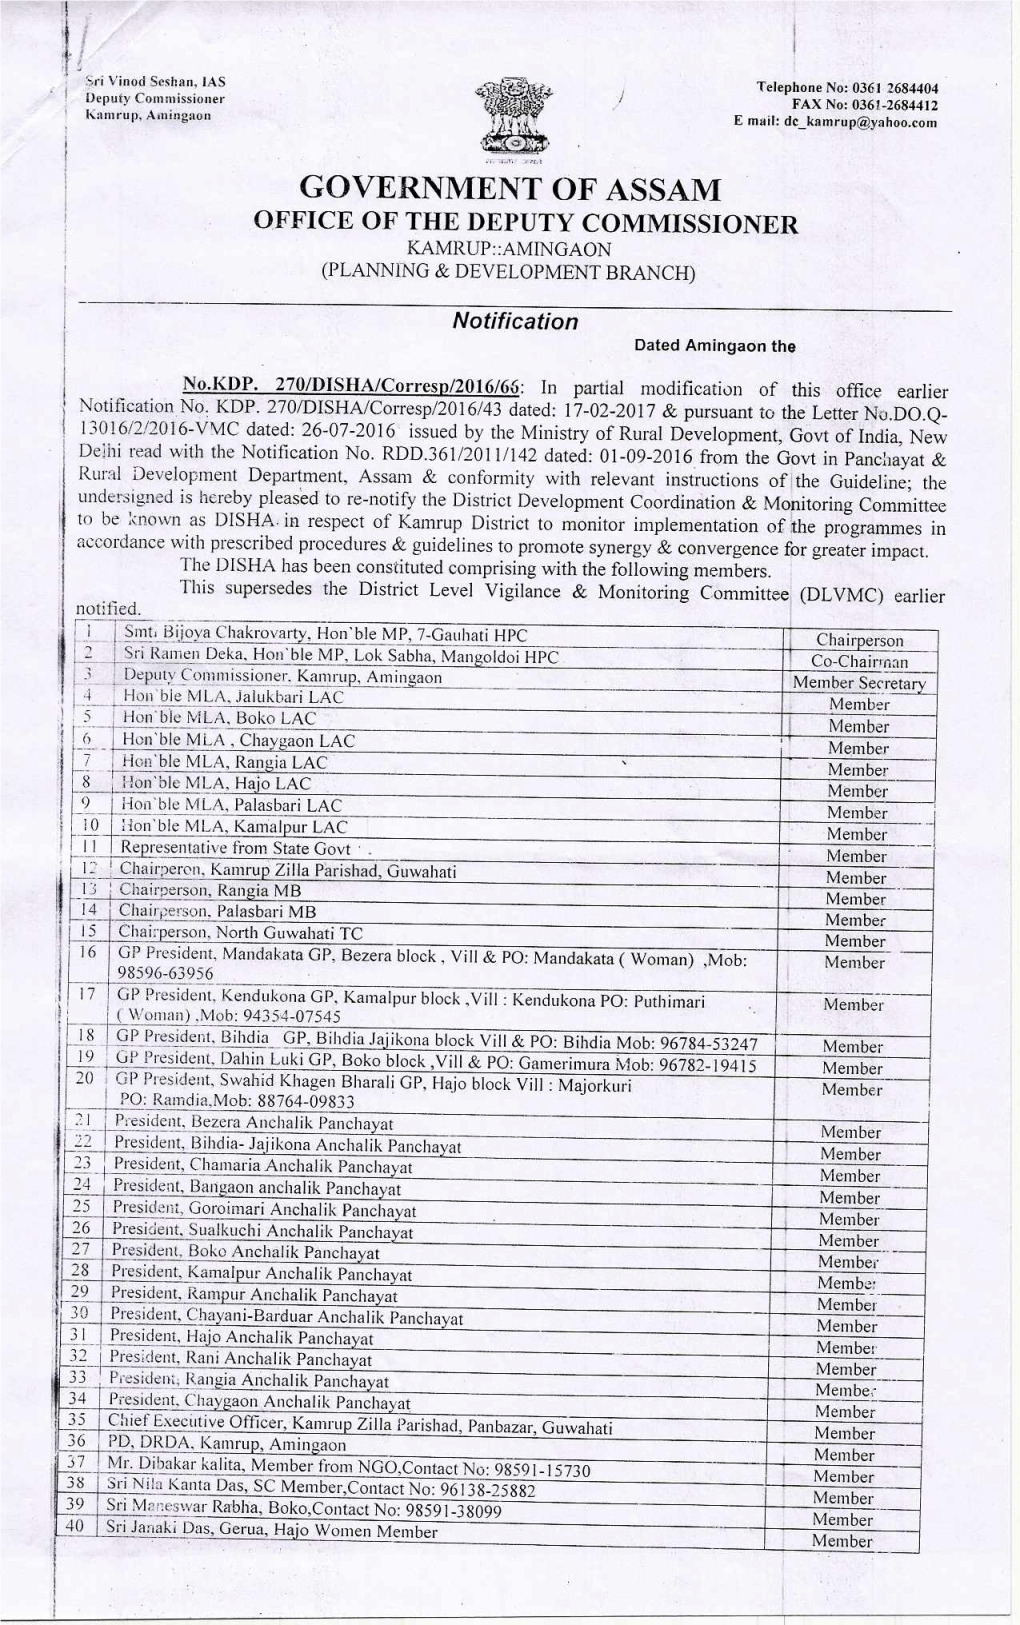 Government of Assam Office of the Deputy Commissioner Icamrup::Amingaon (Planning & Development Branch)